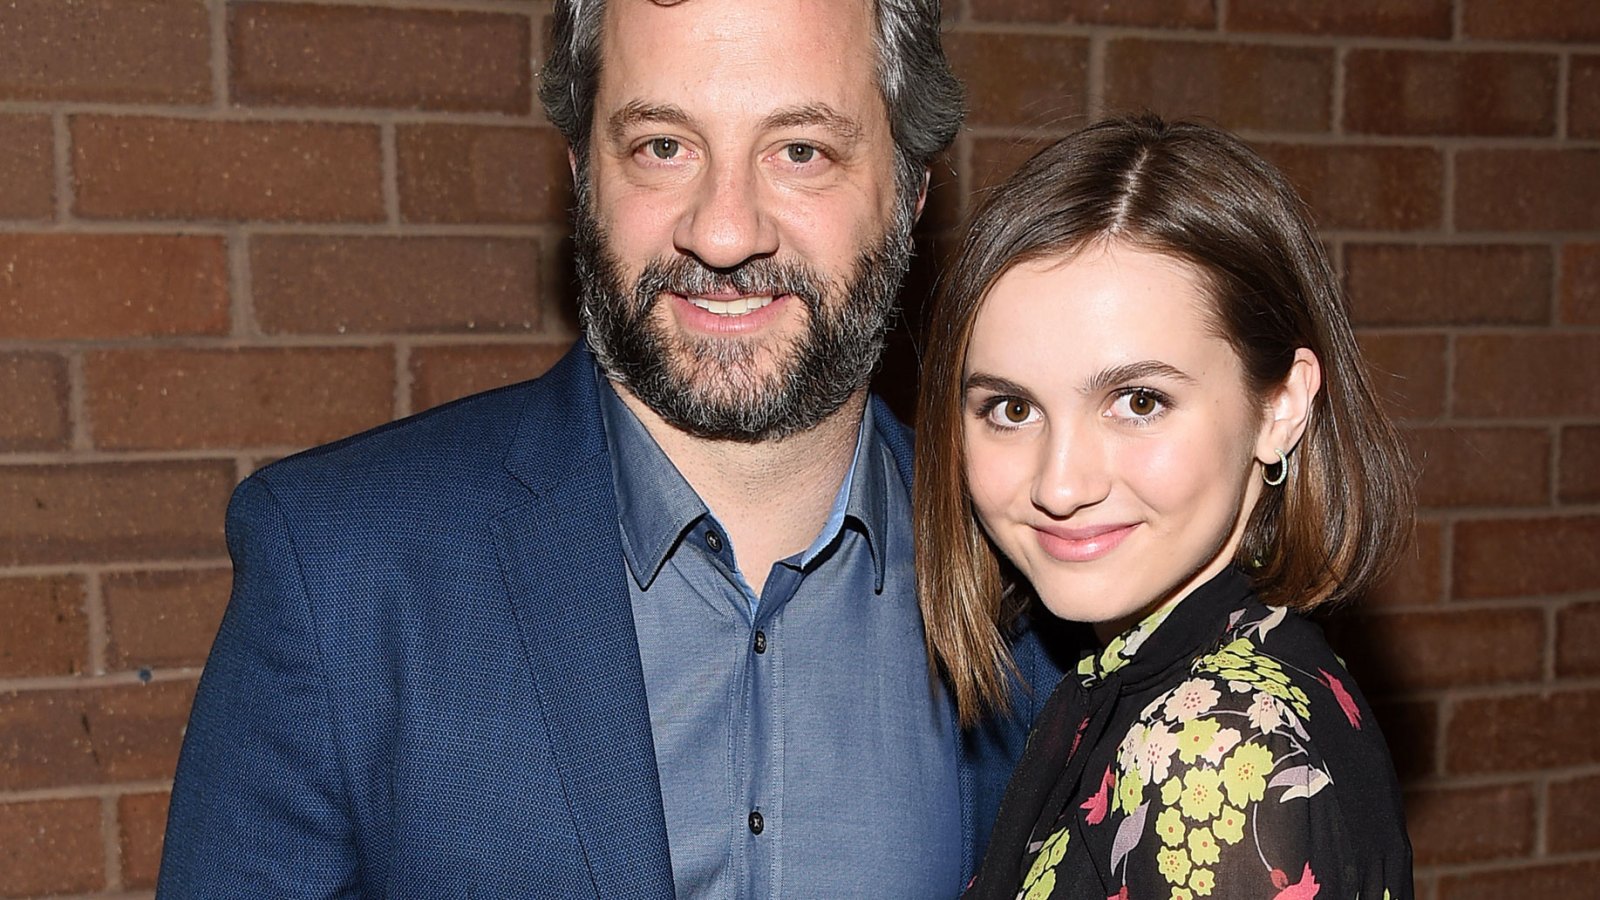 Judd Apatow: Proud papa at daughter Maude's premiere, Features